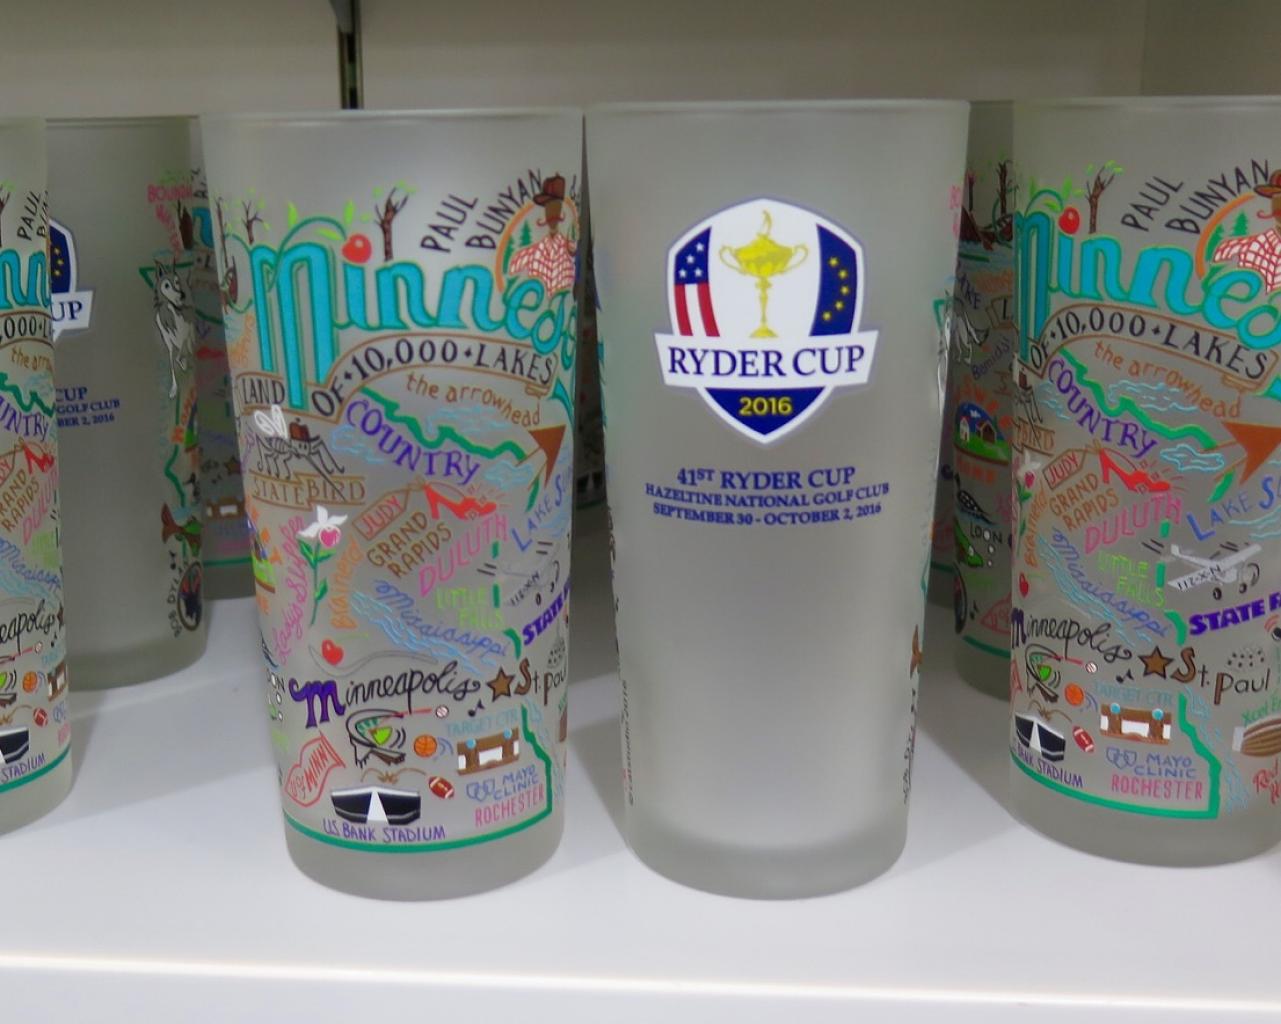 15 Cool Items You Can Find At The Ryder Cup Merchandise Pavilion This